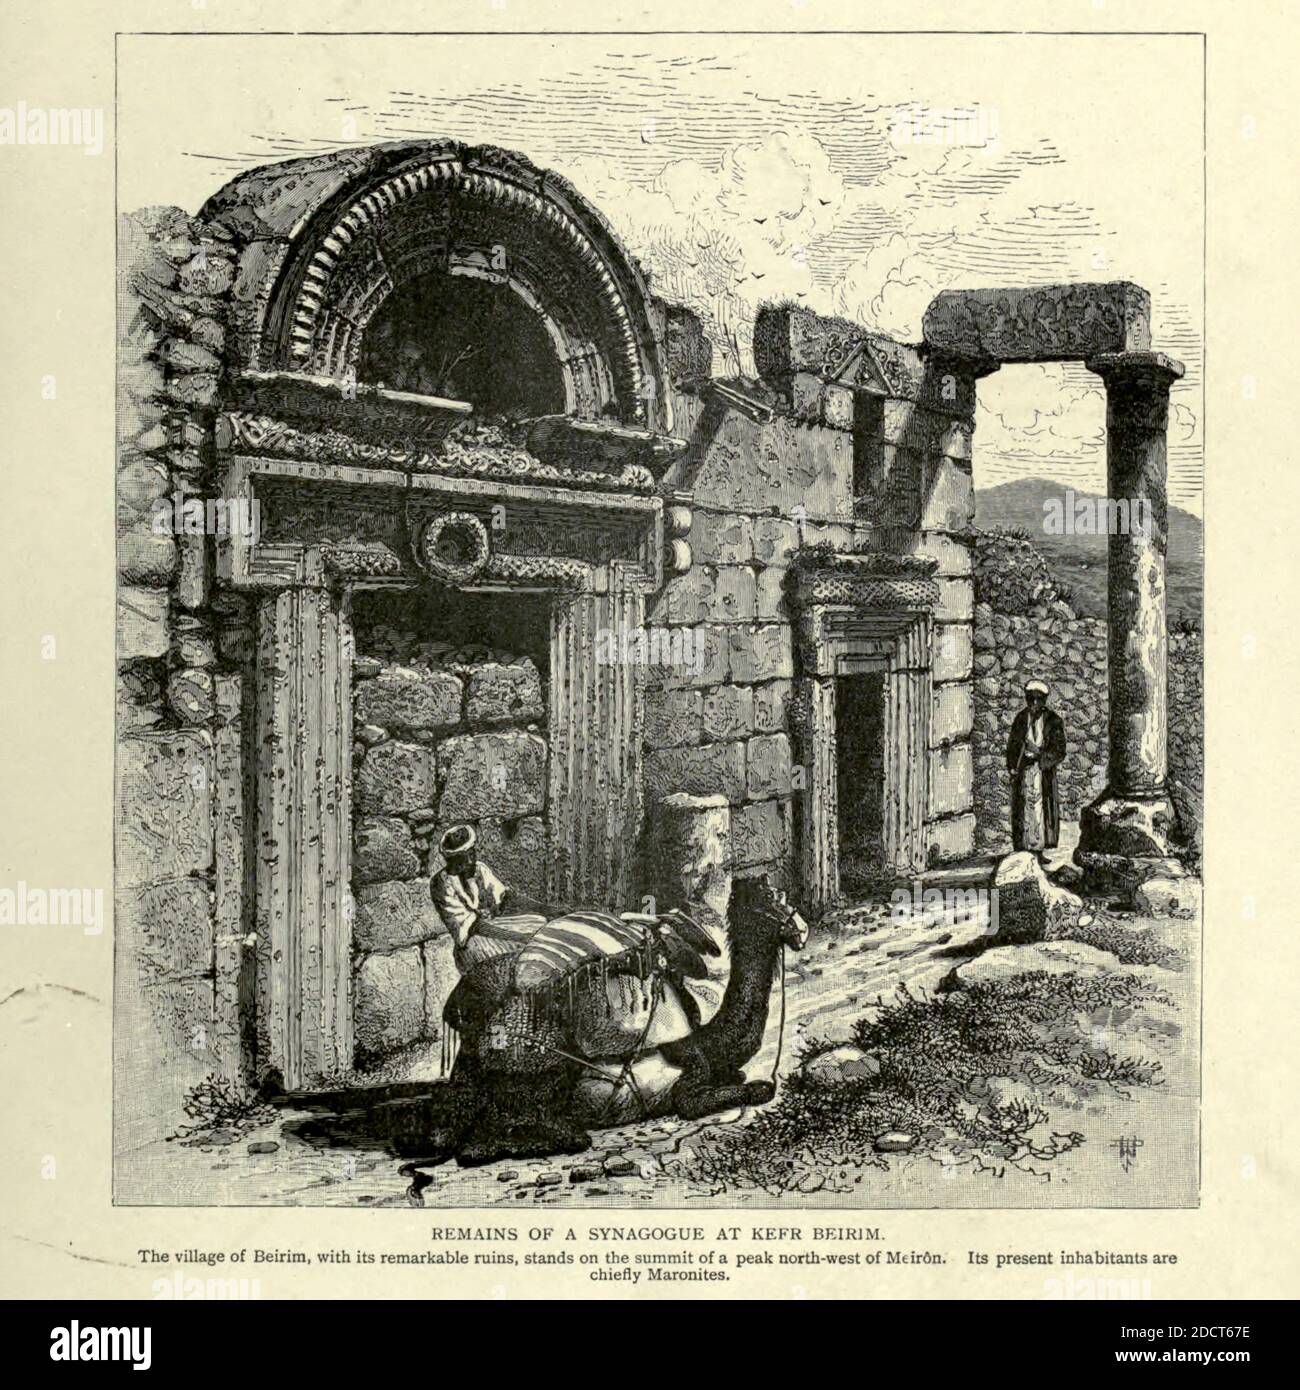 Remains of a Synagogue at Kefr Beirim [Kafr Bir'im, also Kefr Berem] Engraving on Wood from Picturesque Palestine, Sinai and Egypt by Wilson, Charles William, Sir, 1836-1905; Lane-Poole, Stanley, 1854-1931 Volume 2. Published in New York by D. Appleton in 1881-1884 Stock Photo